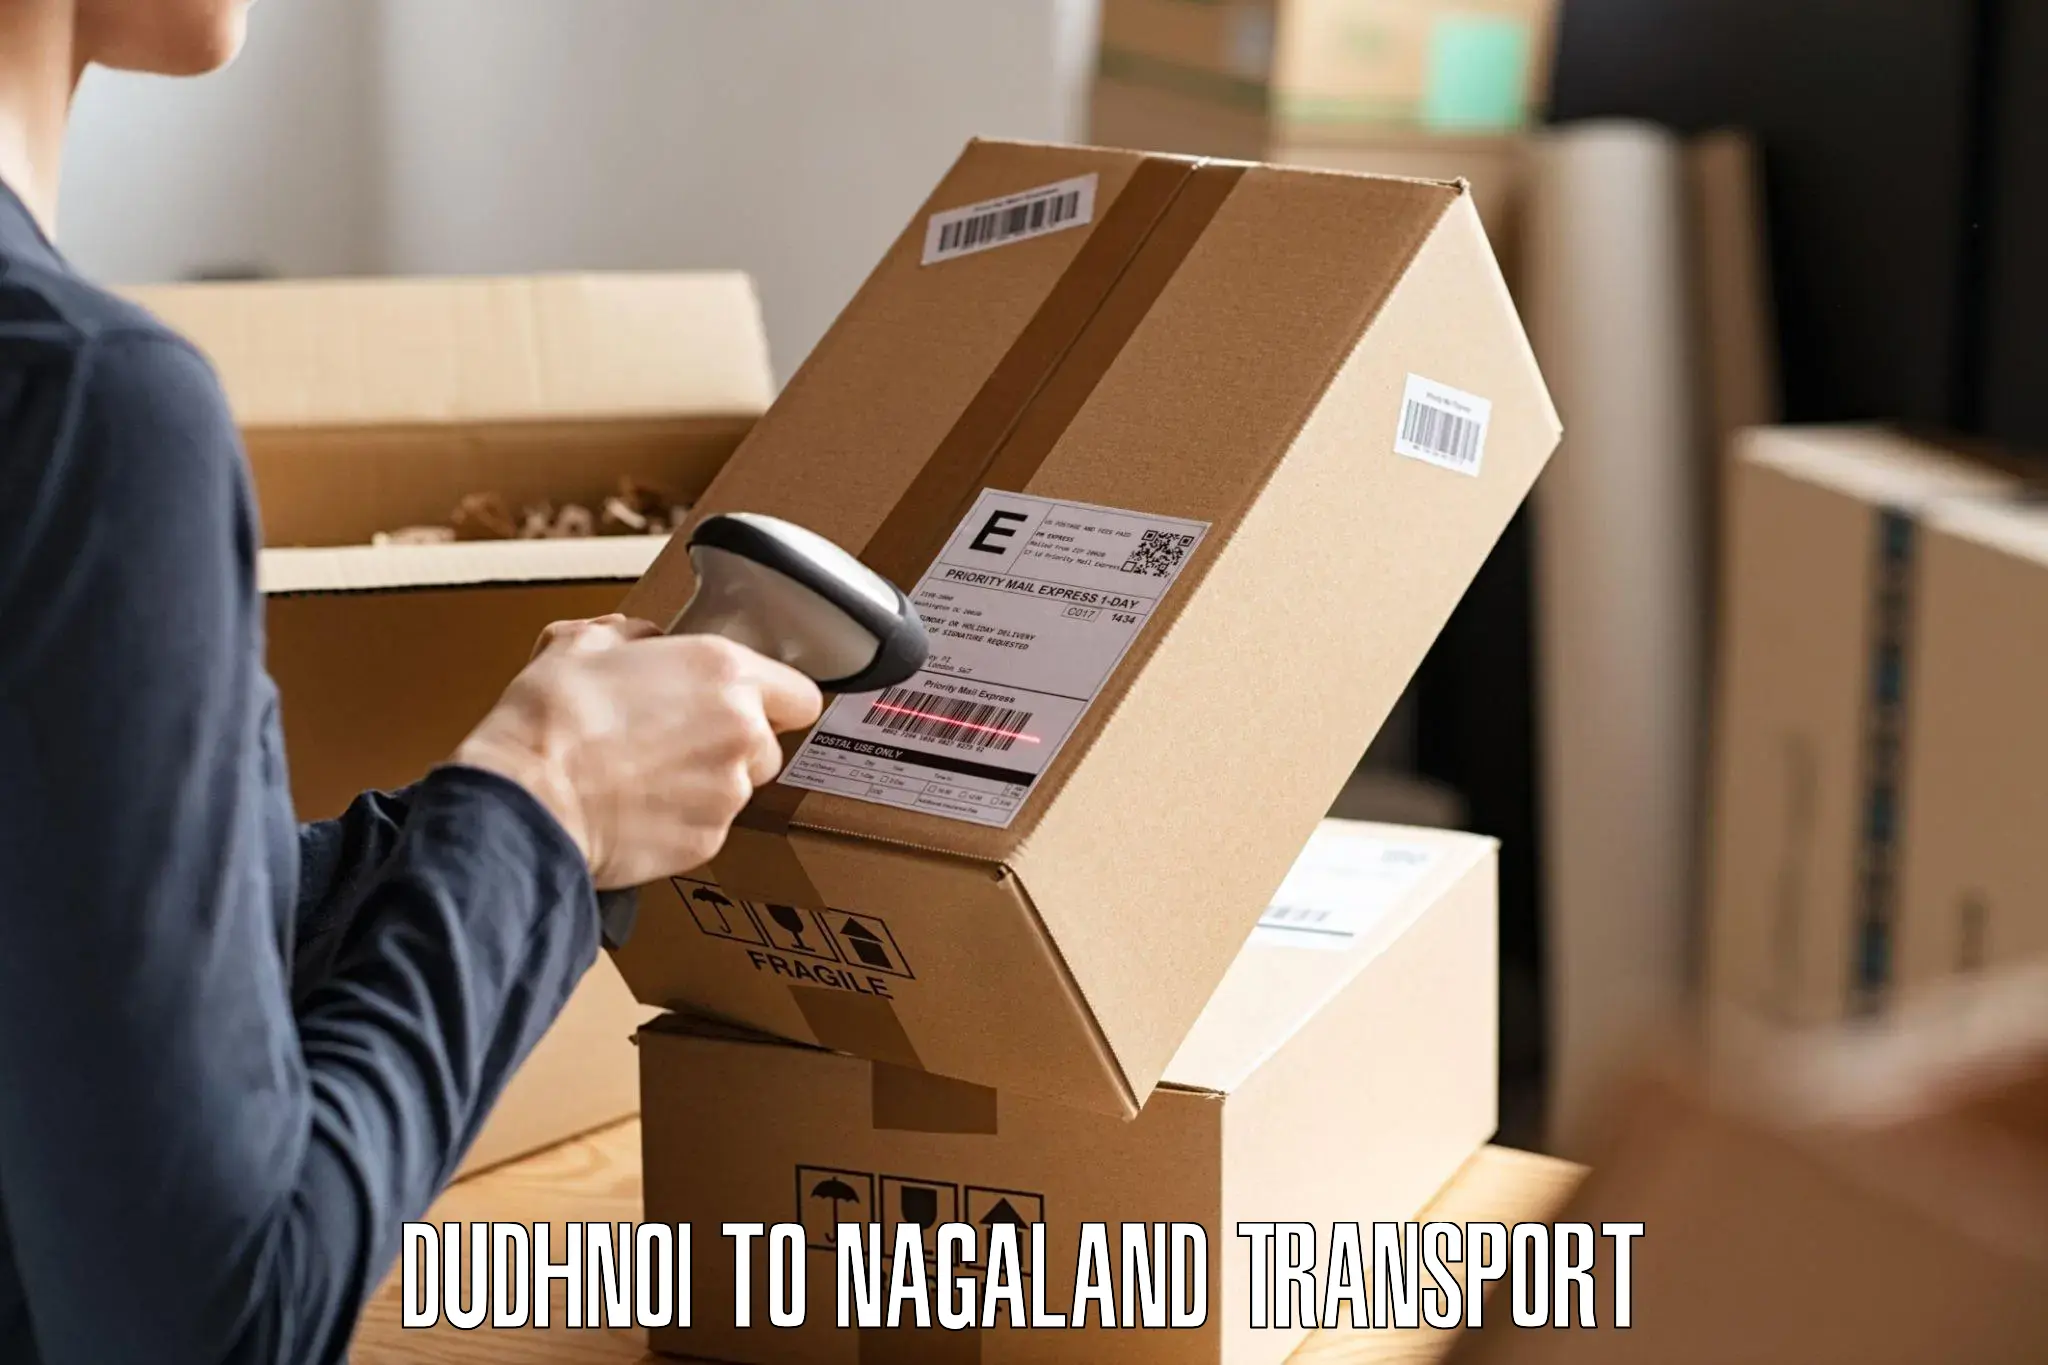 Pick up transport service in Dudhnoi to Mon